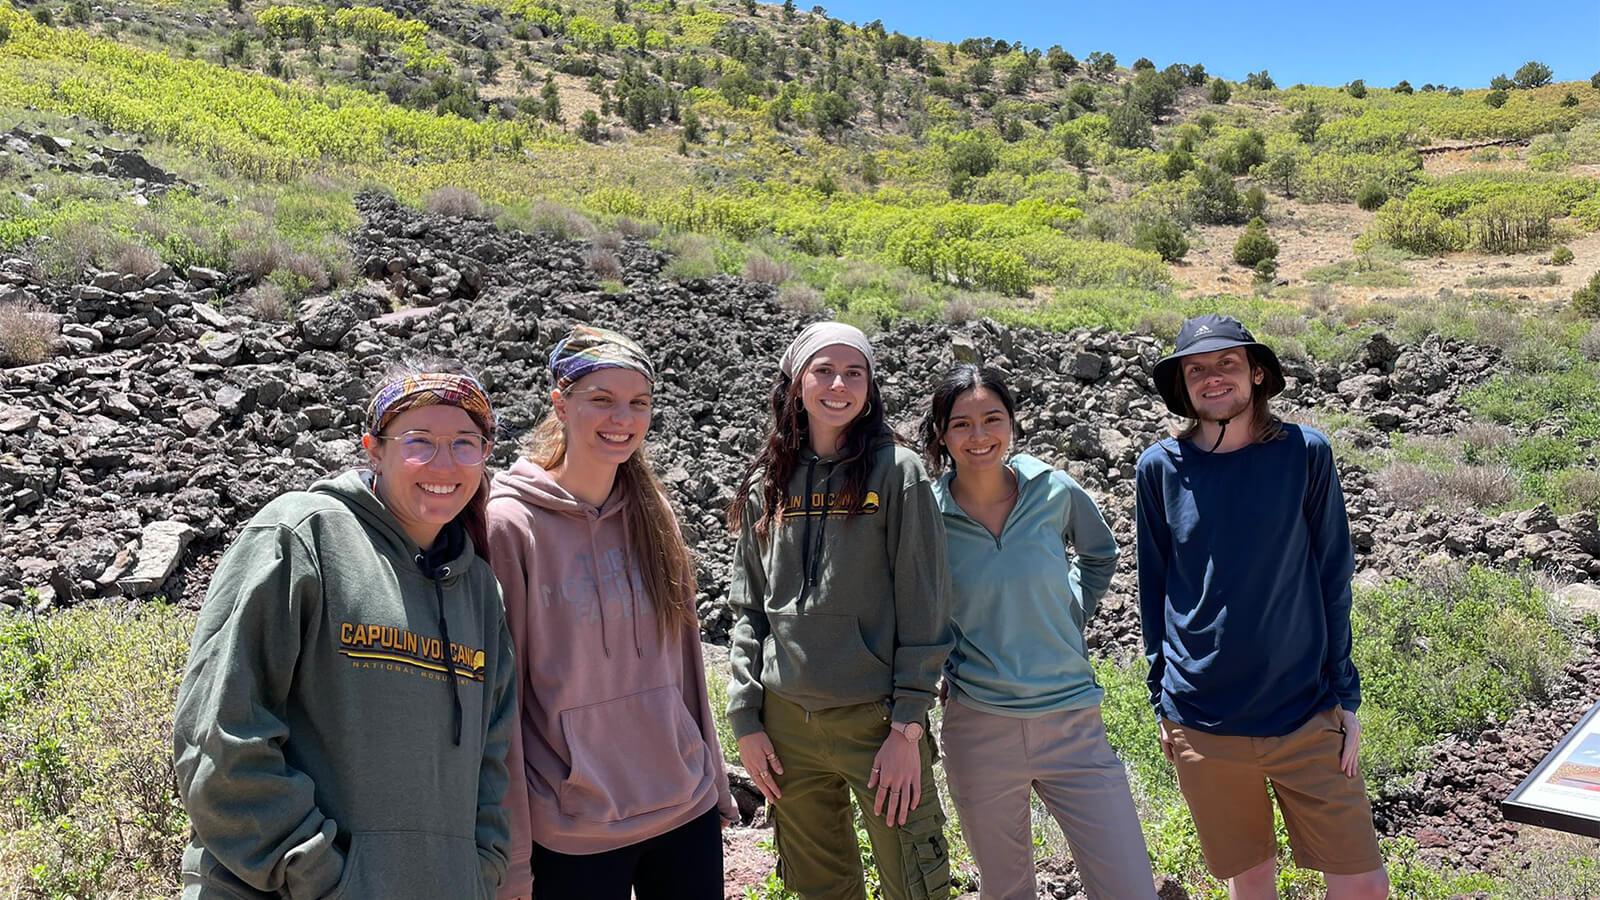 A group of students stands in front of a rock field on a rugged and arid looking hillside.